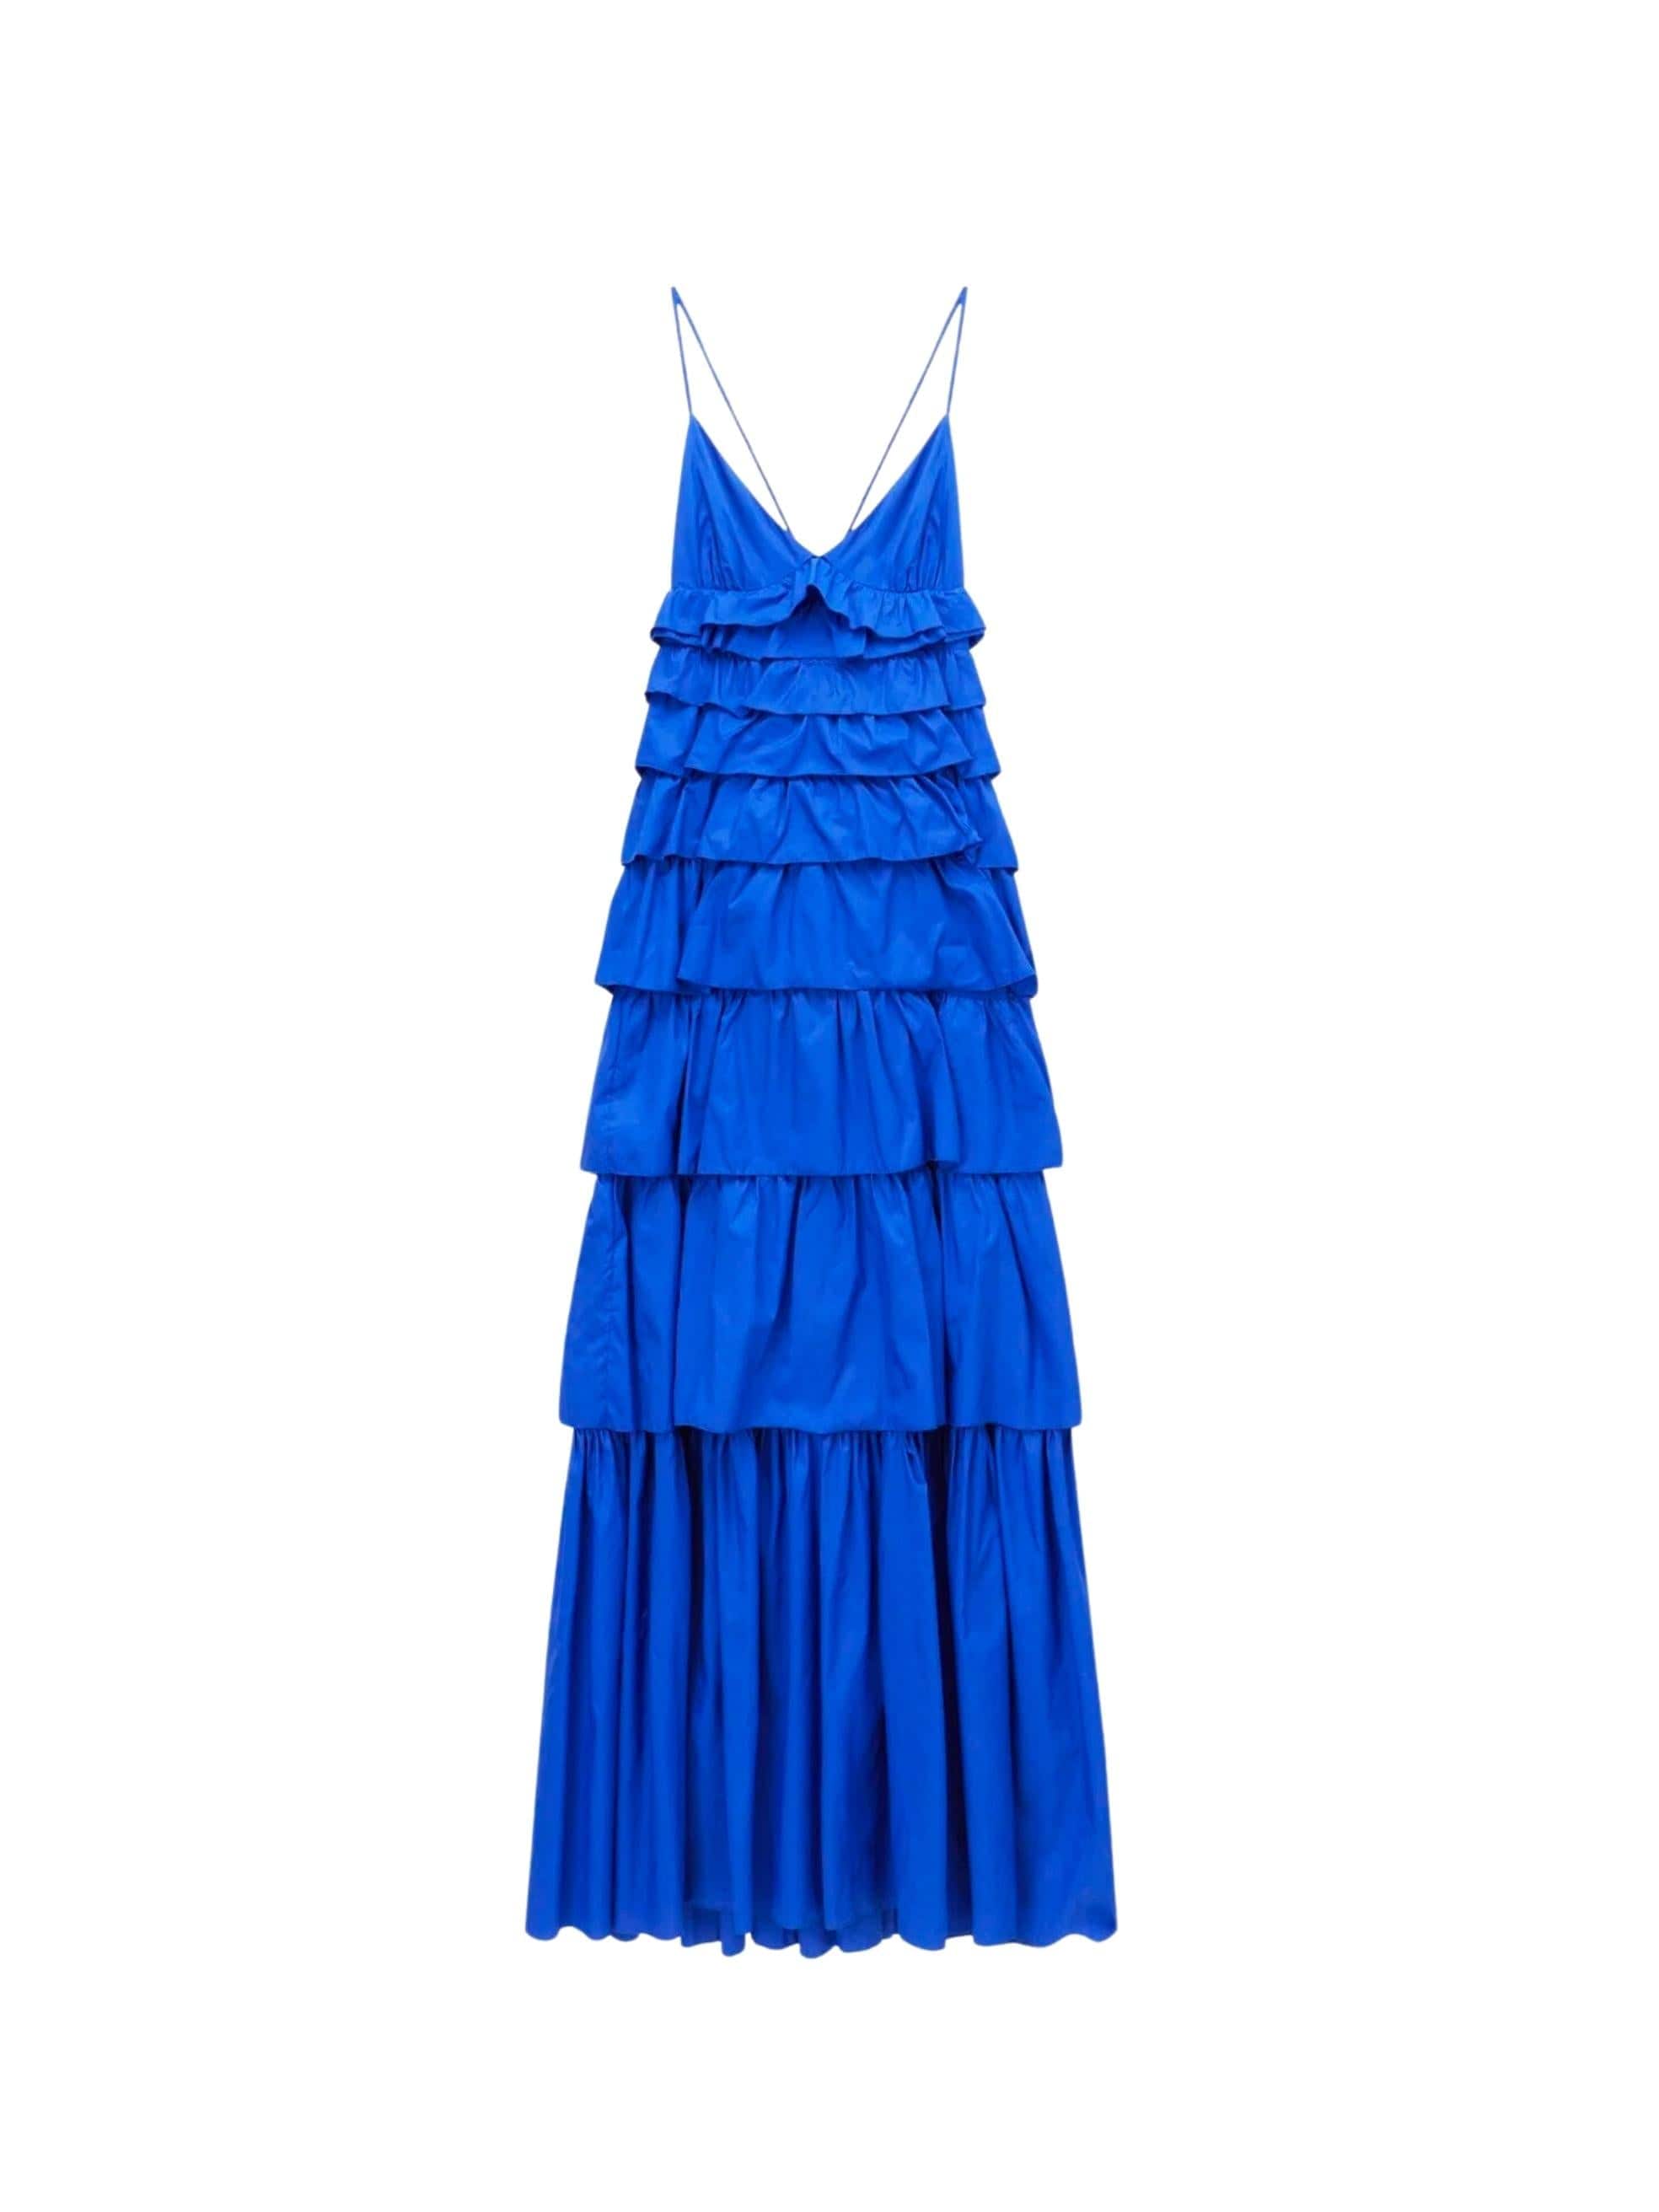 Rylie Dress in Lapis